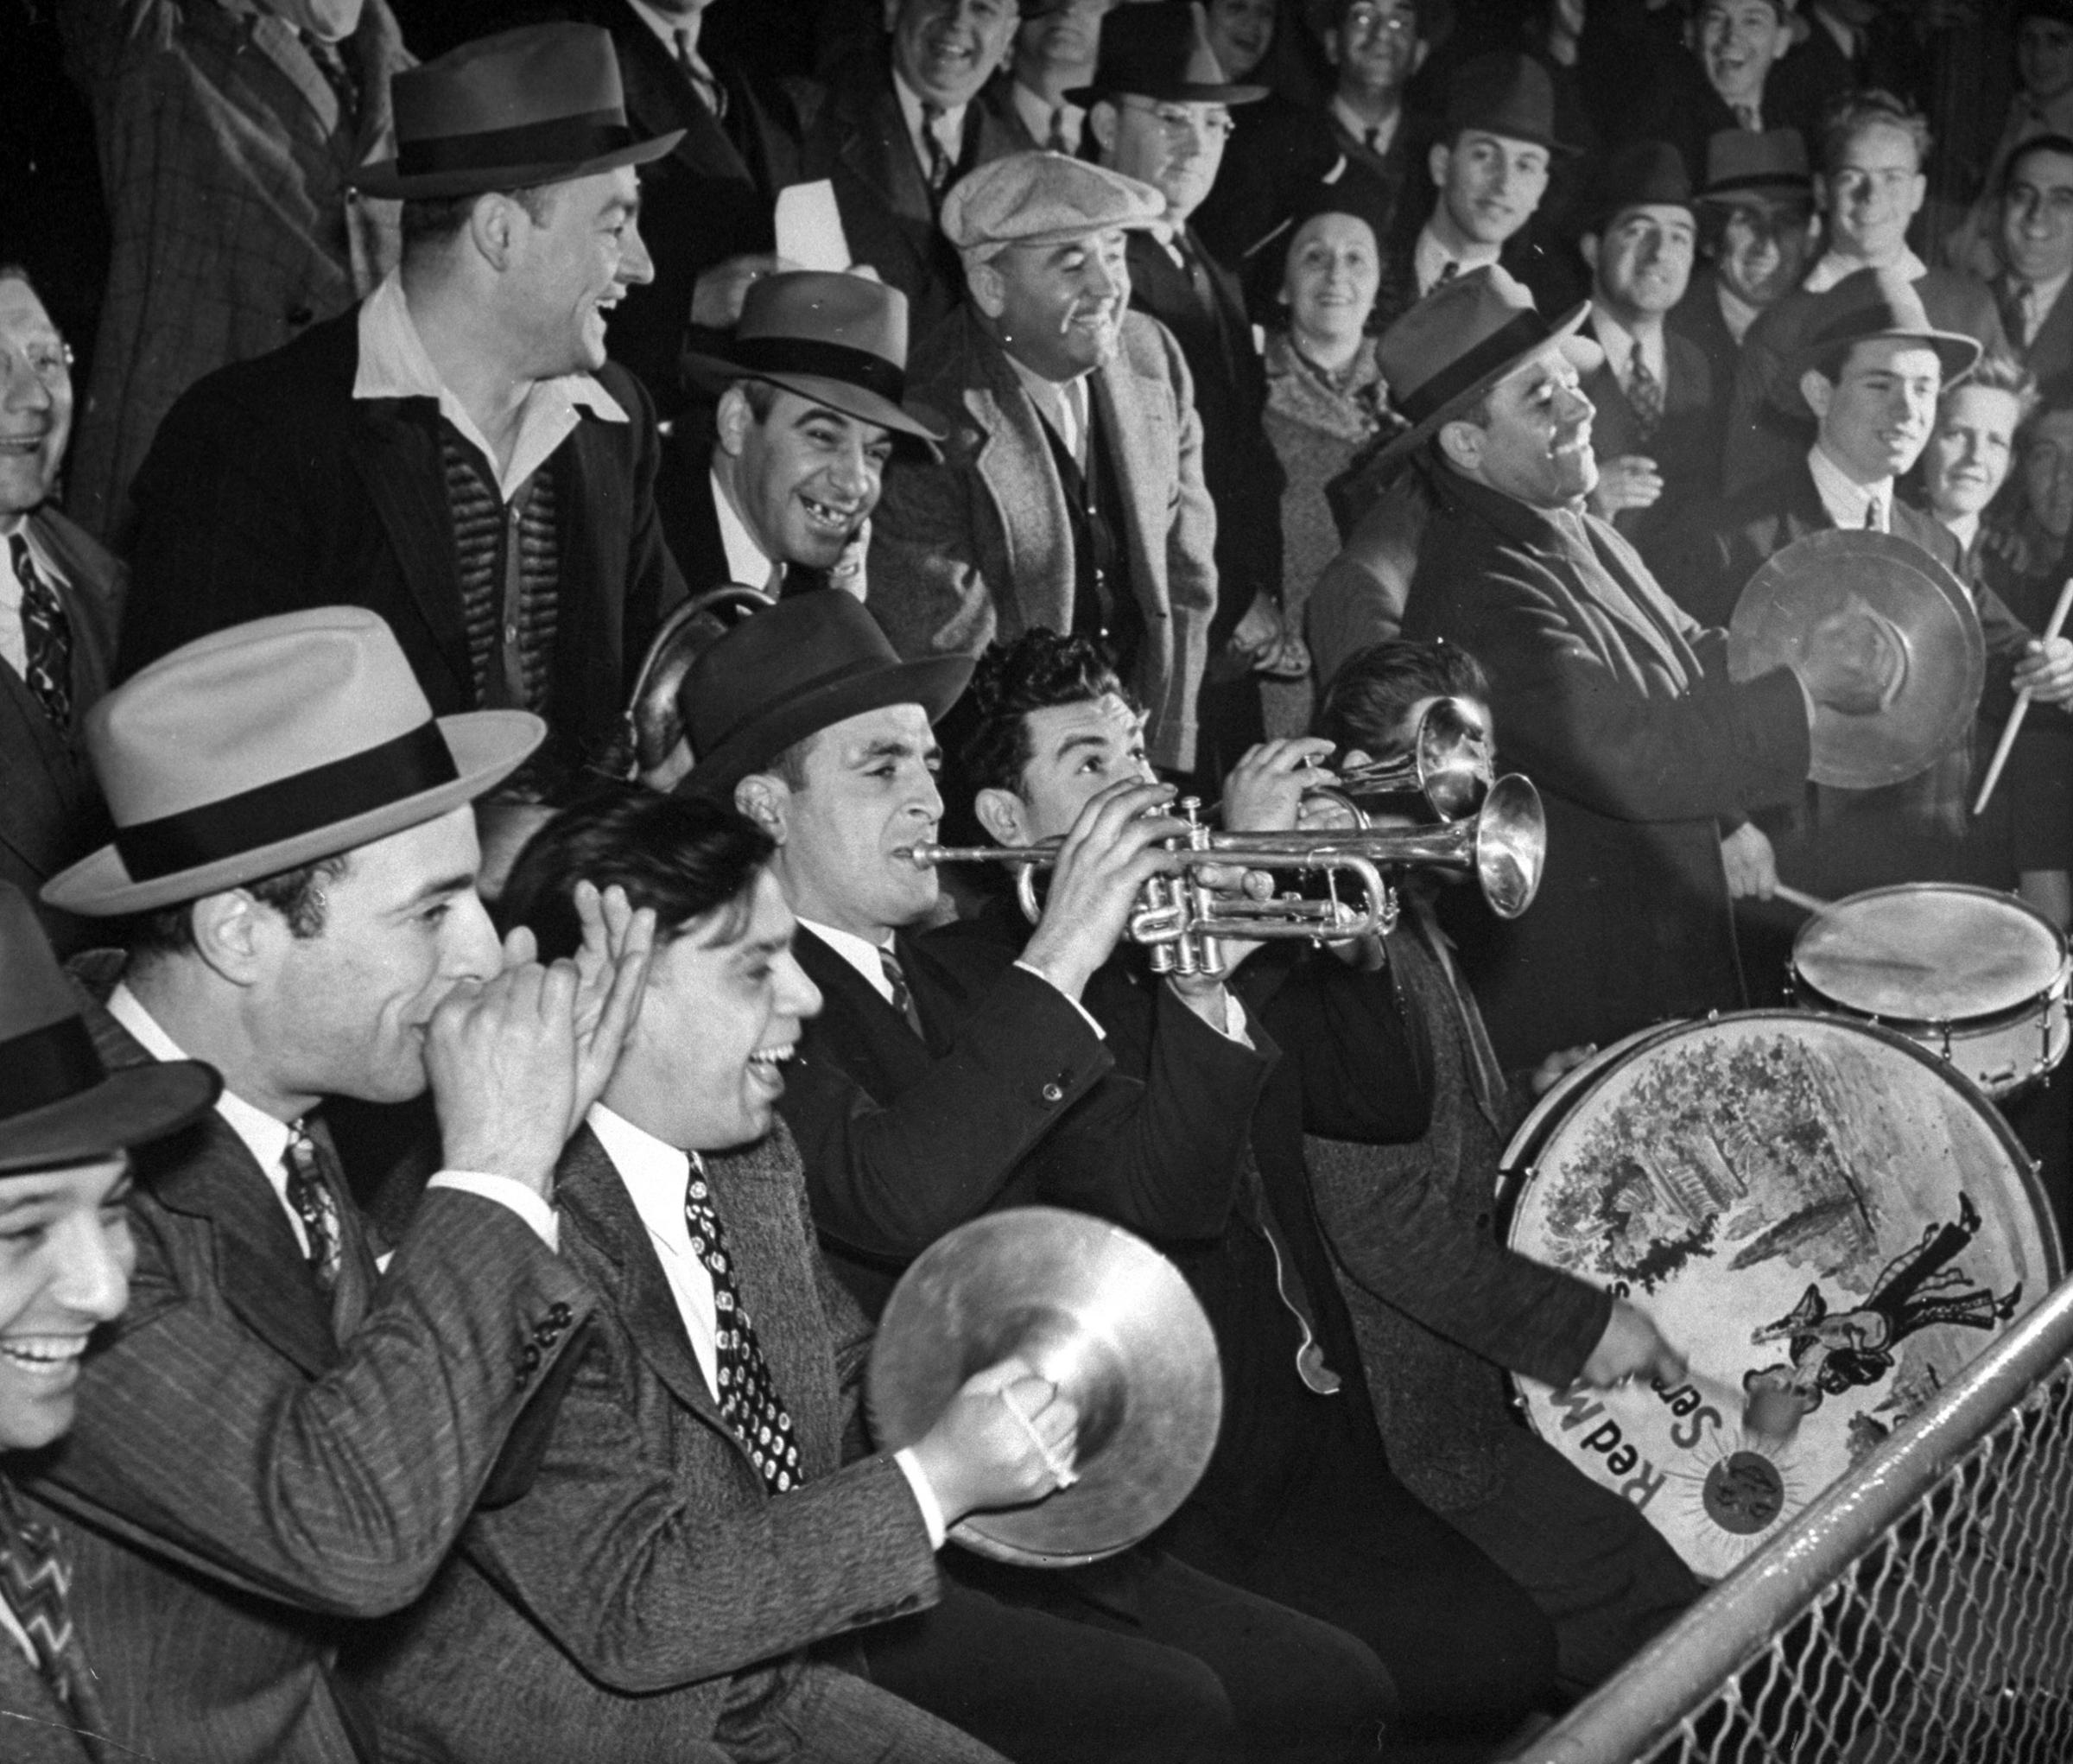 Fans playing instruments and cheering while watching a Brooklyn Dodgers baseball game at Ebbets Field, May 1940.